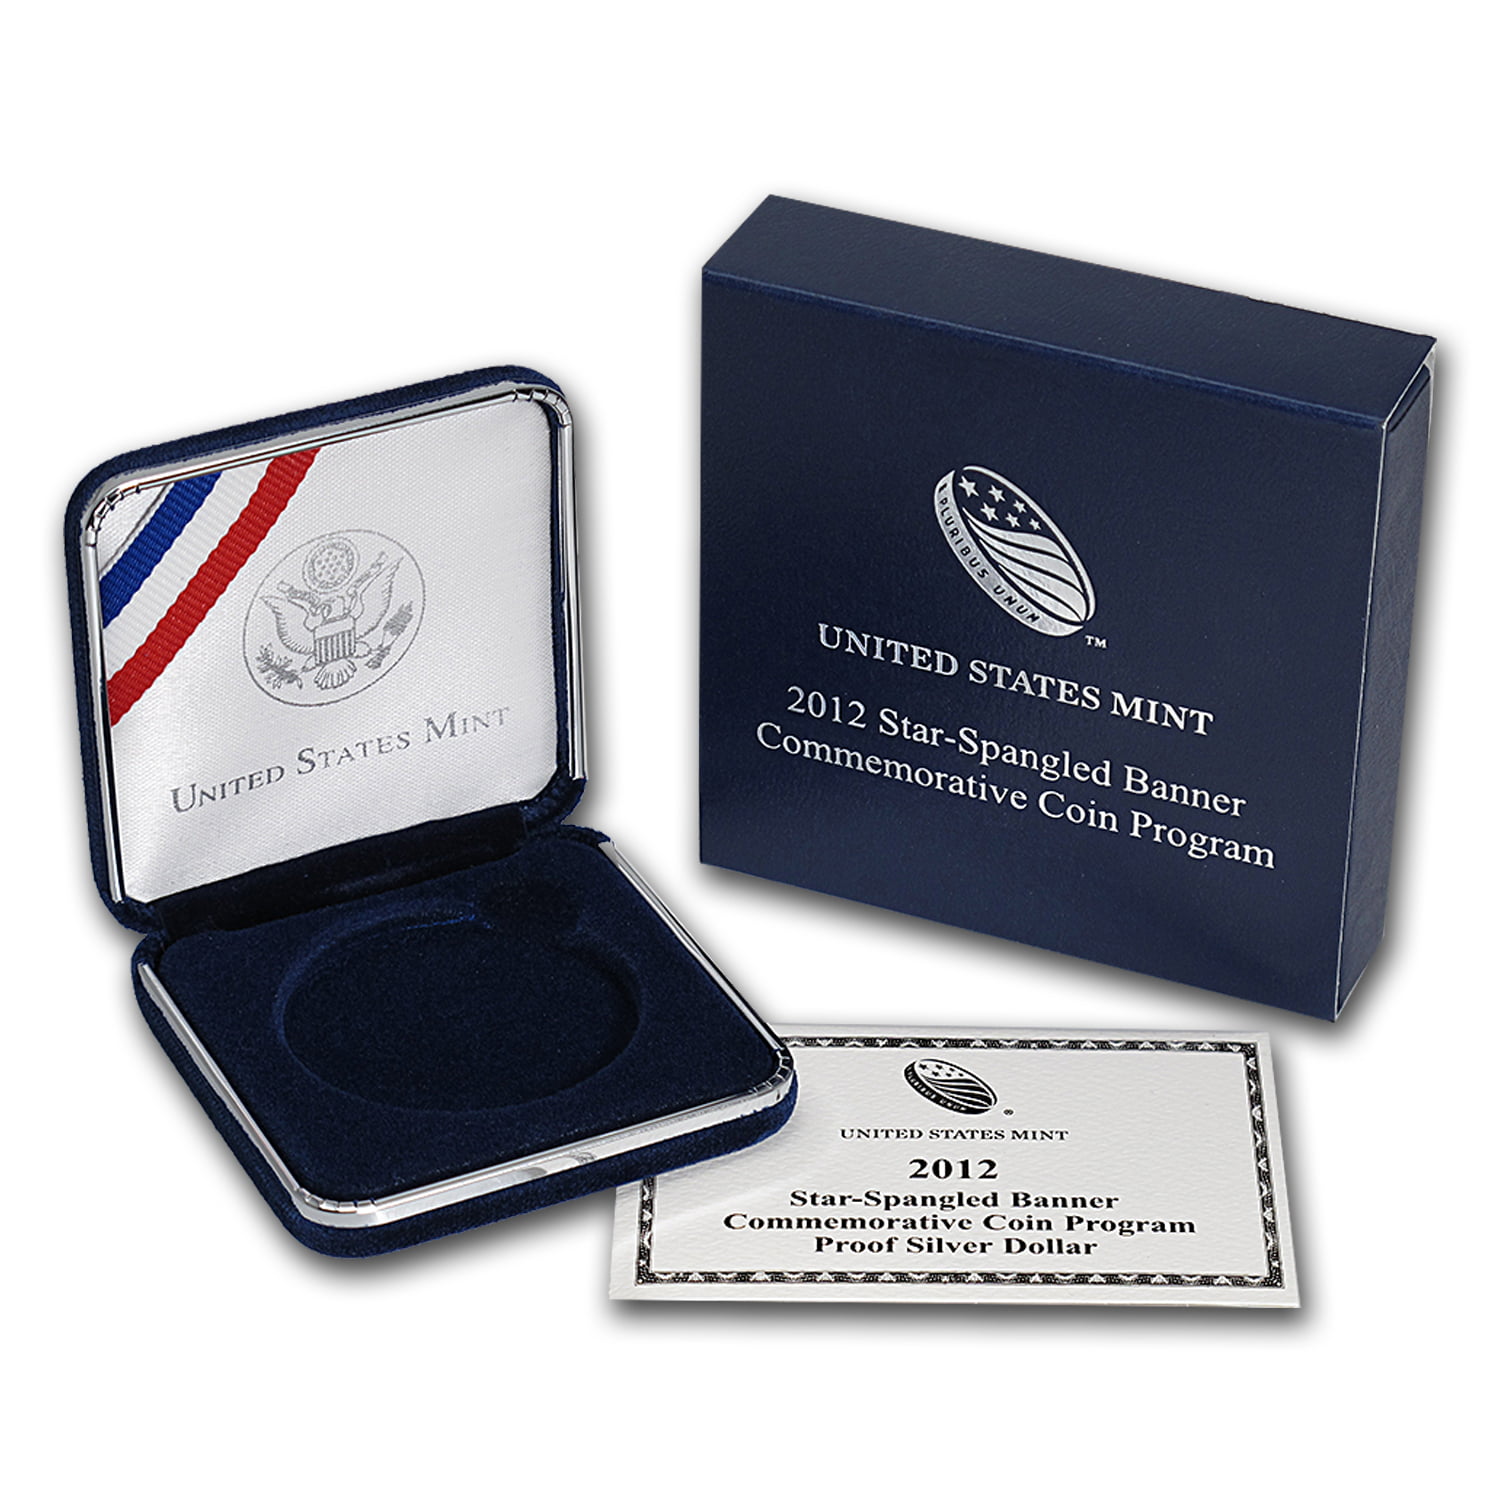 2012 P Star-Spangled Banner PROOF Silver Dollar US Mint $1 Coin Box and COA 